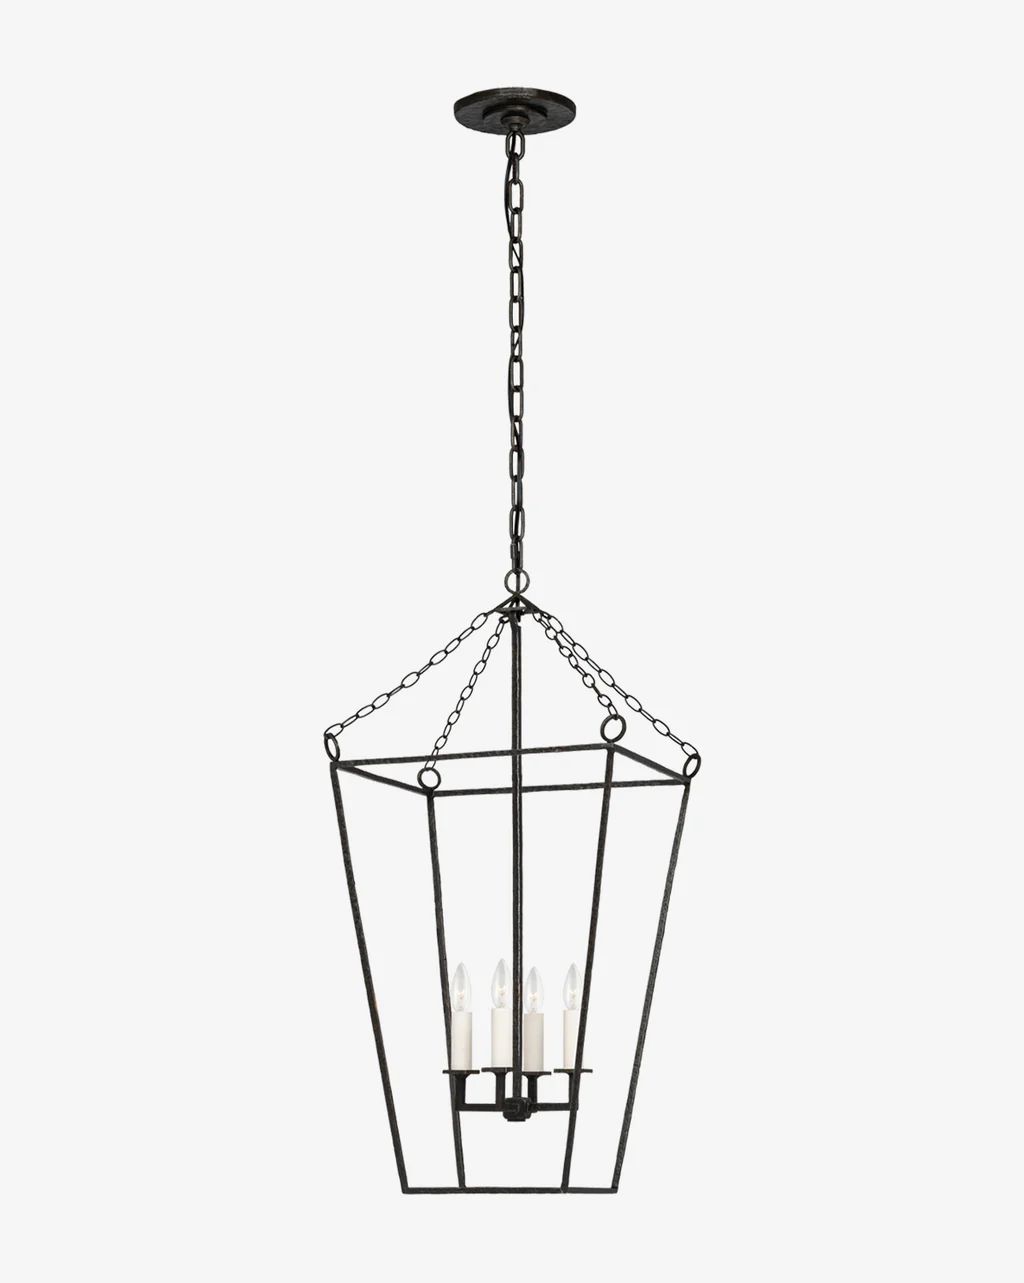 Malloy Open Frame Forged Lantern | McGee & Co.